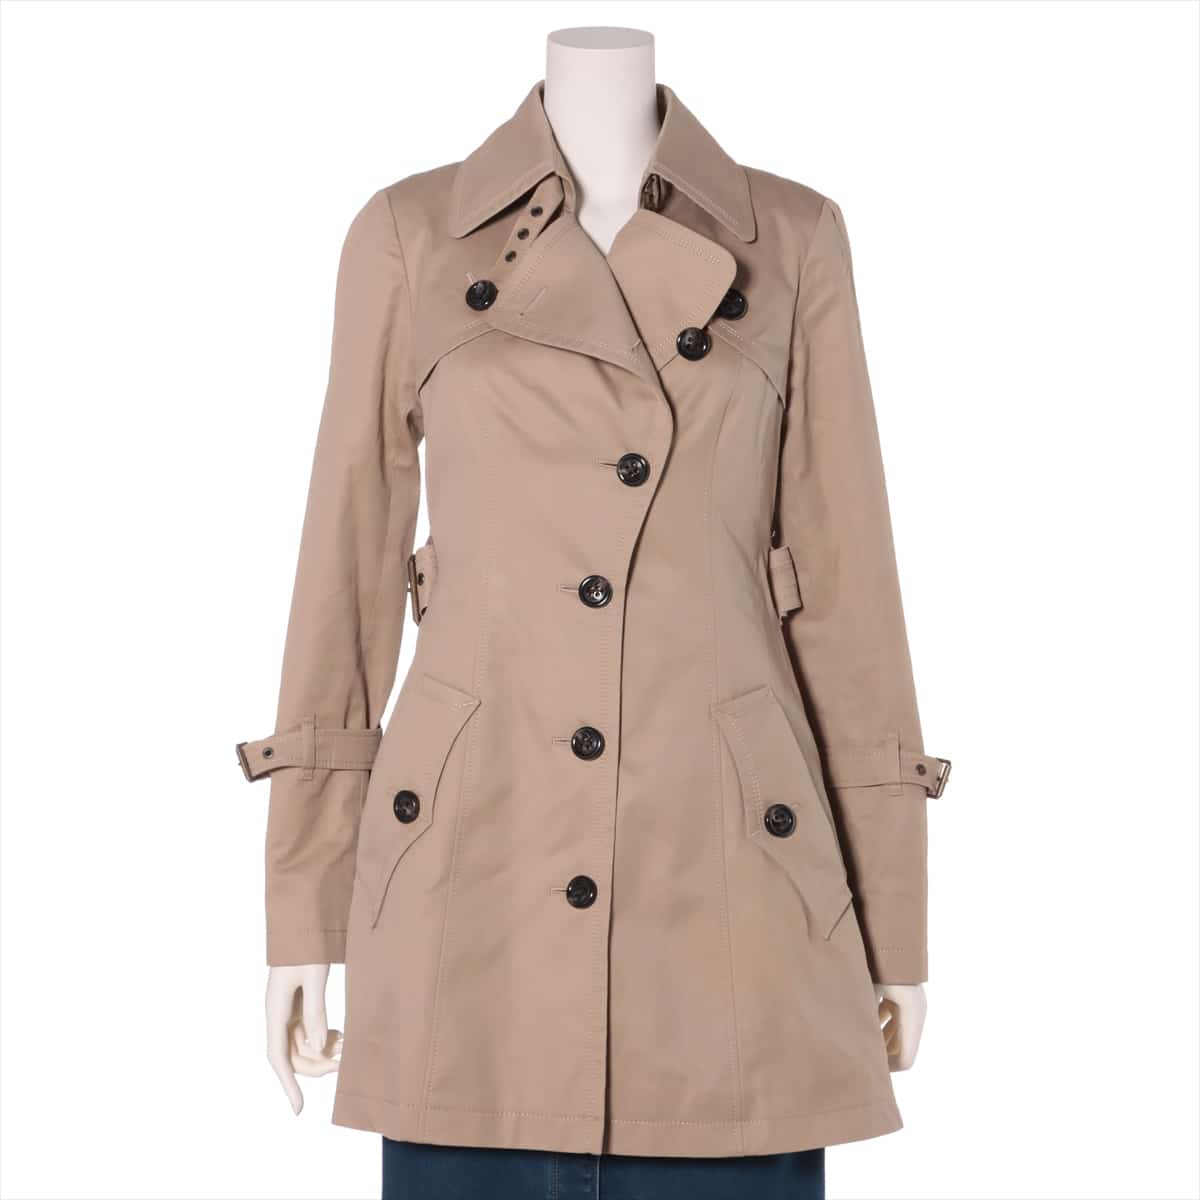 BURBERRY BLUE LABEL Cotton Trench coat 38 Ladies' Beige Lined  with belt